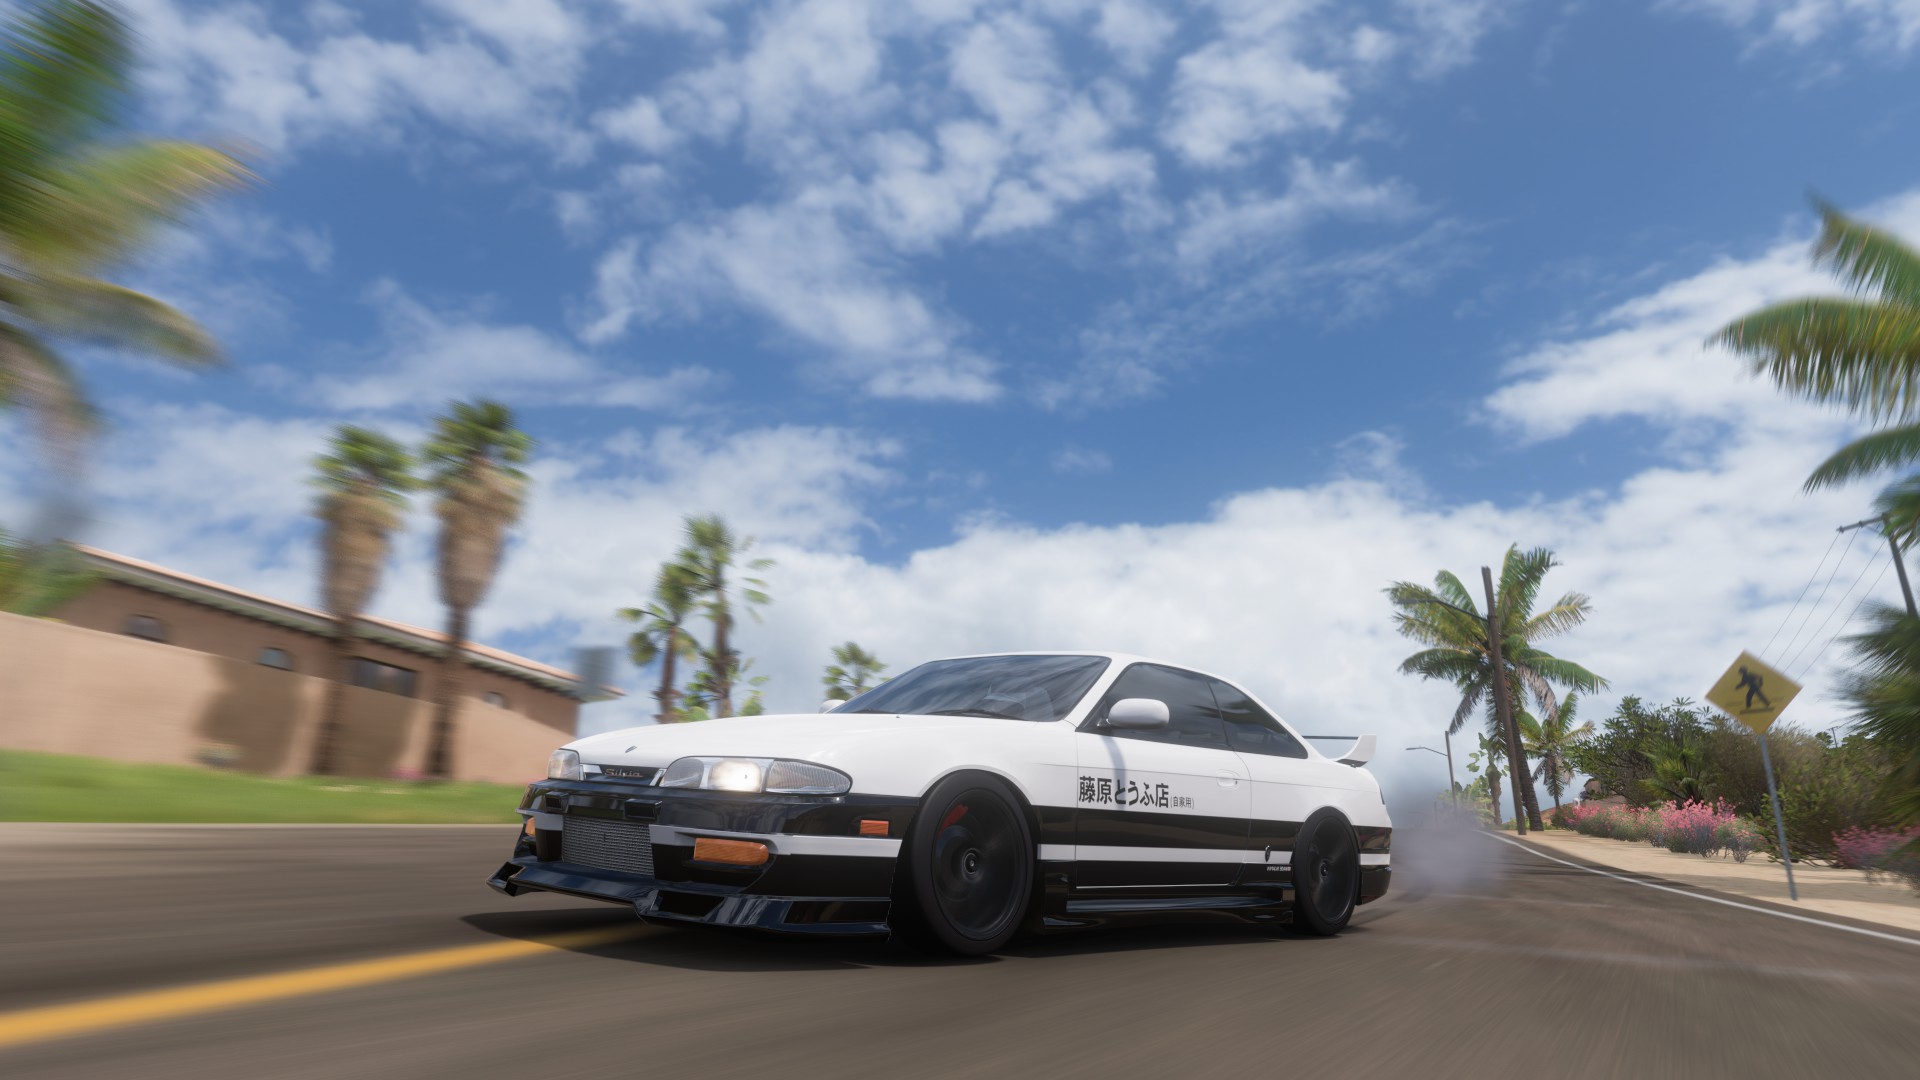 Initial D Nissan Silvia S14 Forza Horizon 5 Nissan Japanese Cars Video Games PlaygroundGames 1920x1080